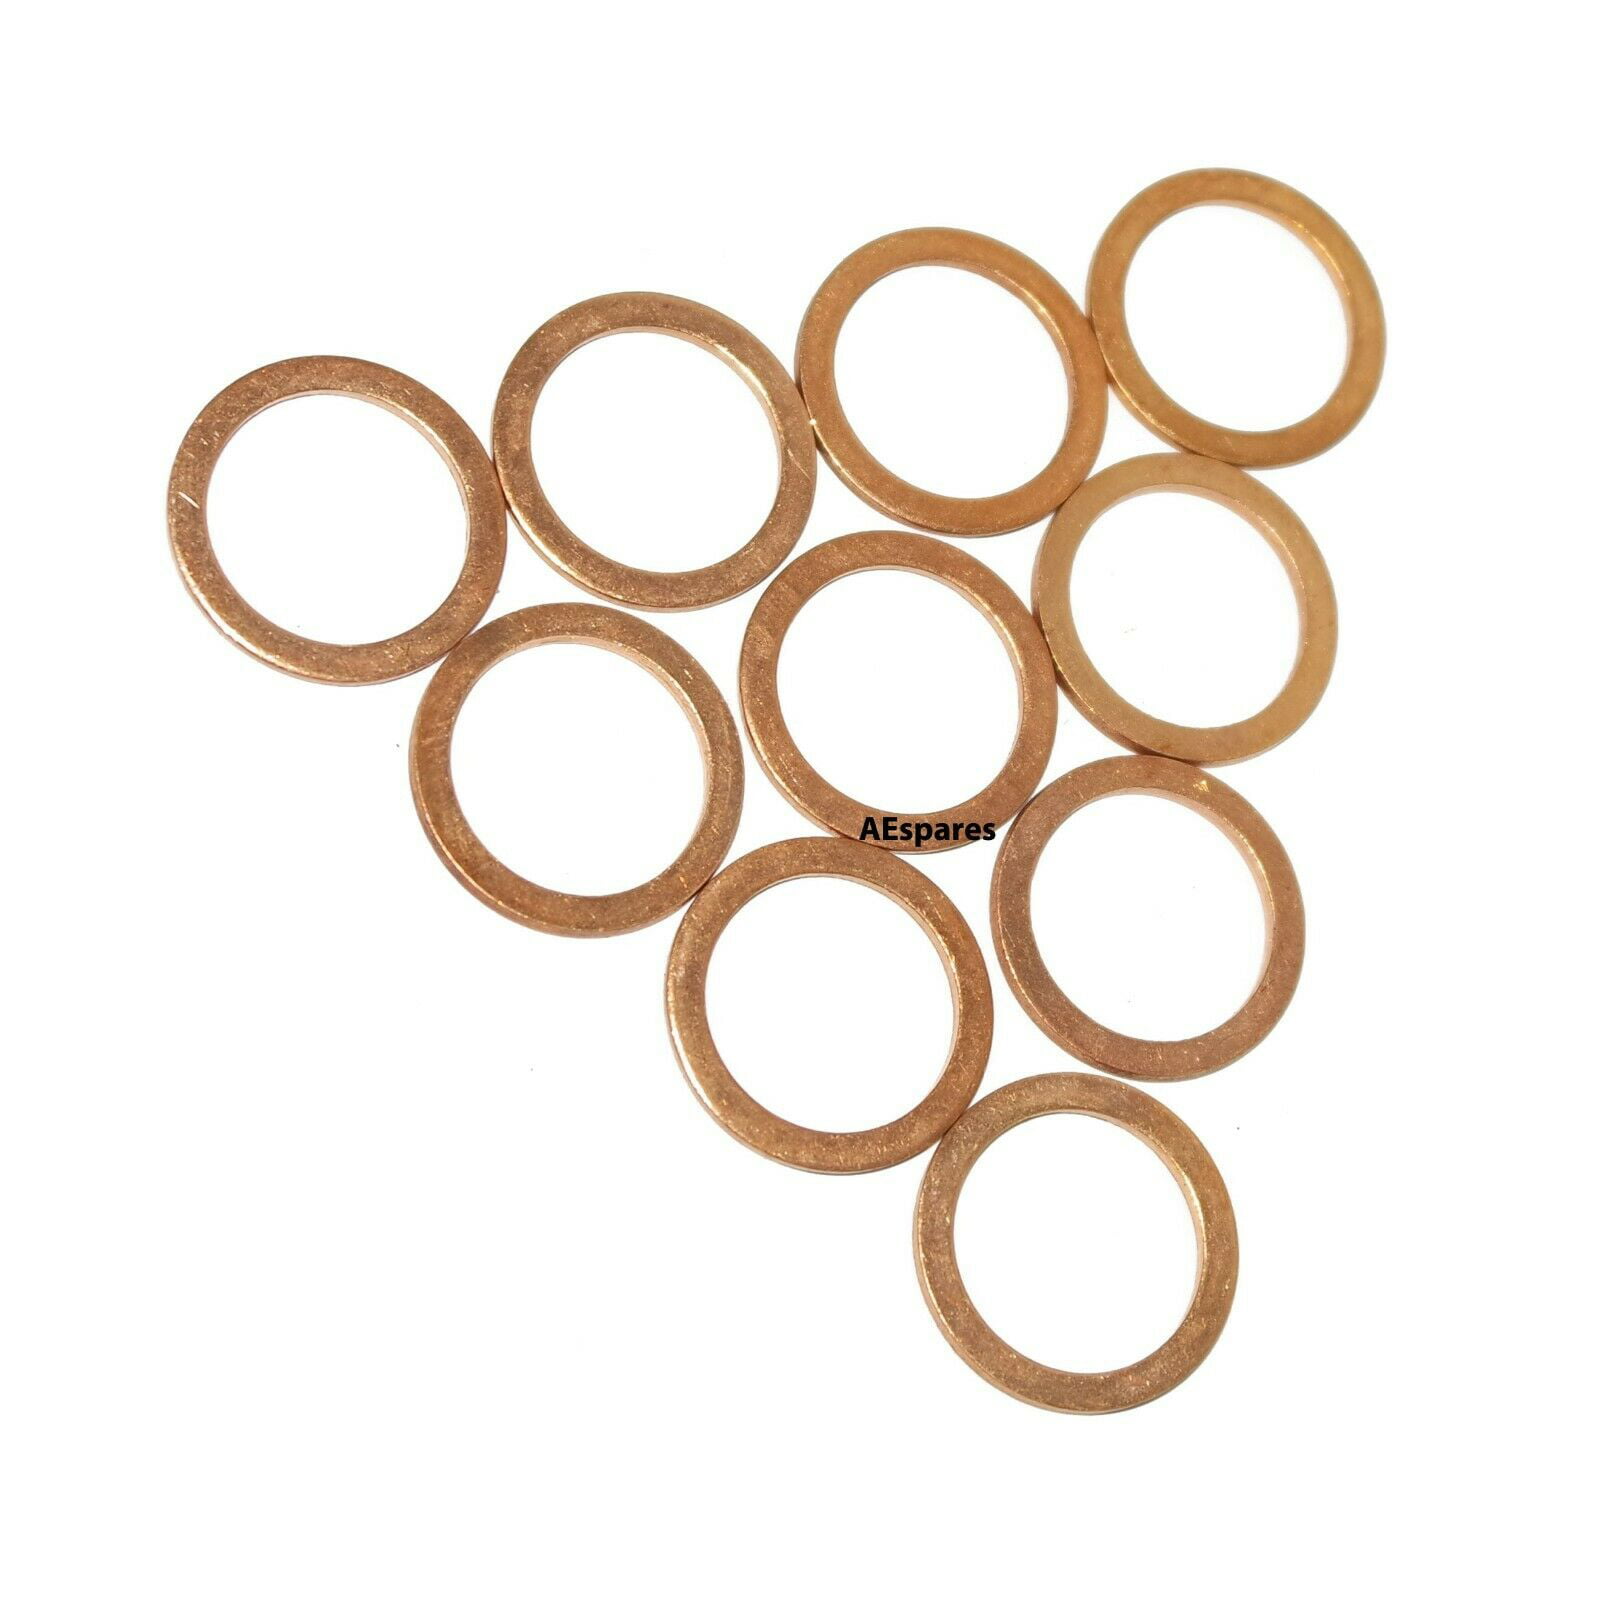 Details about   10 PCS MULTIPURPOSE COPPER CRUSH WASHER SEALING WASHER 18 mm x 24 mm @USD 